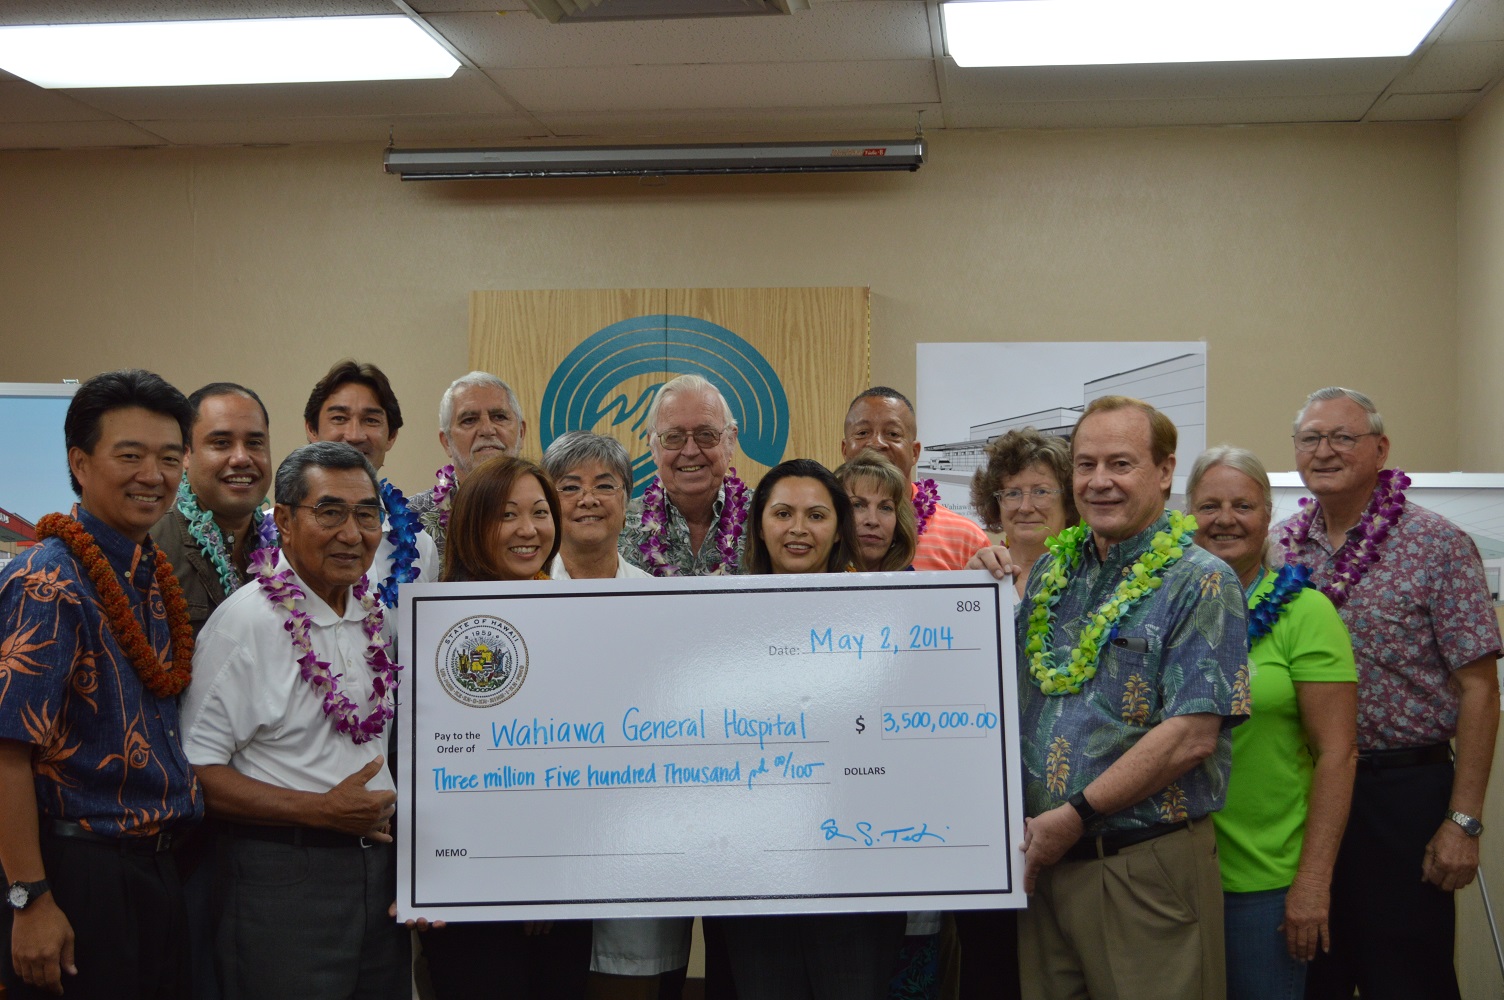 Hawaii Ahe Governor Releases $3.5 Million for Wahiawa General Hospital ...